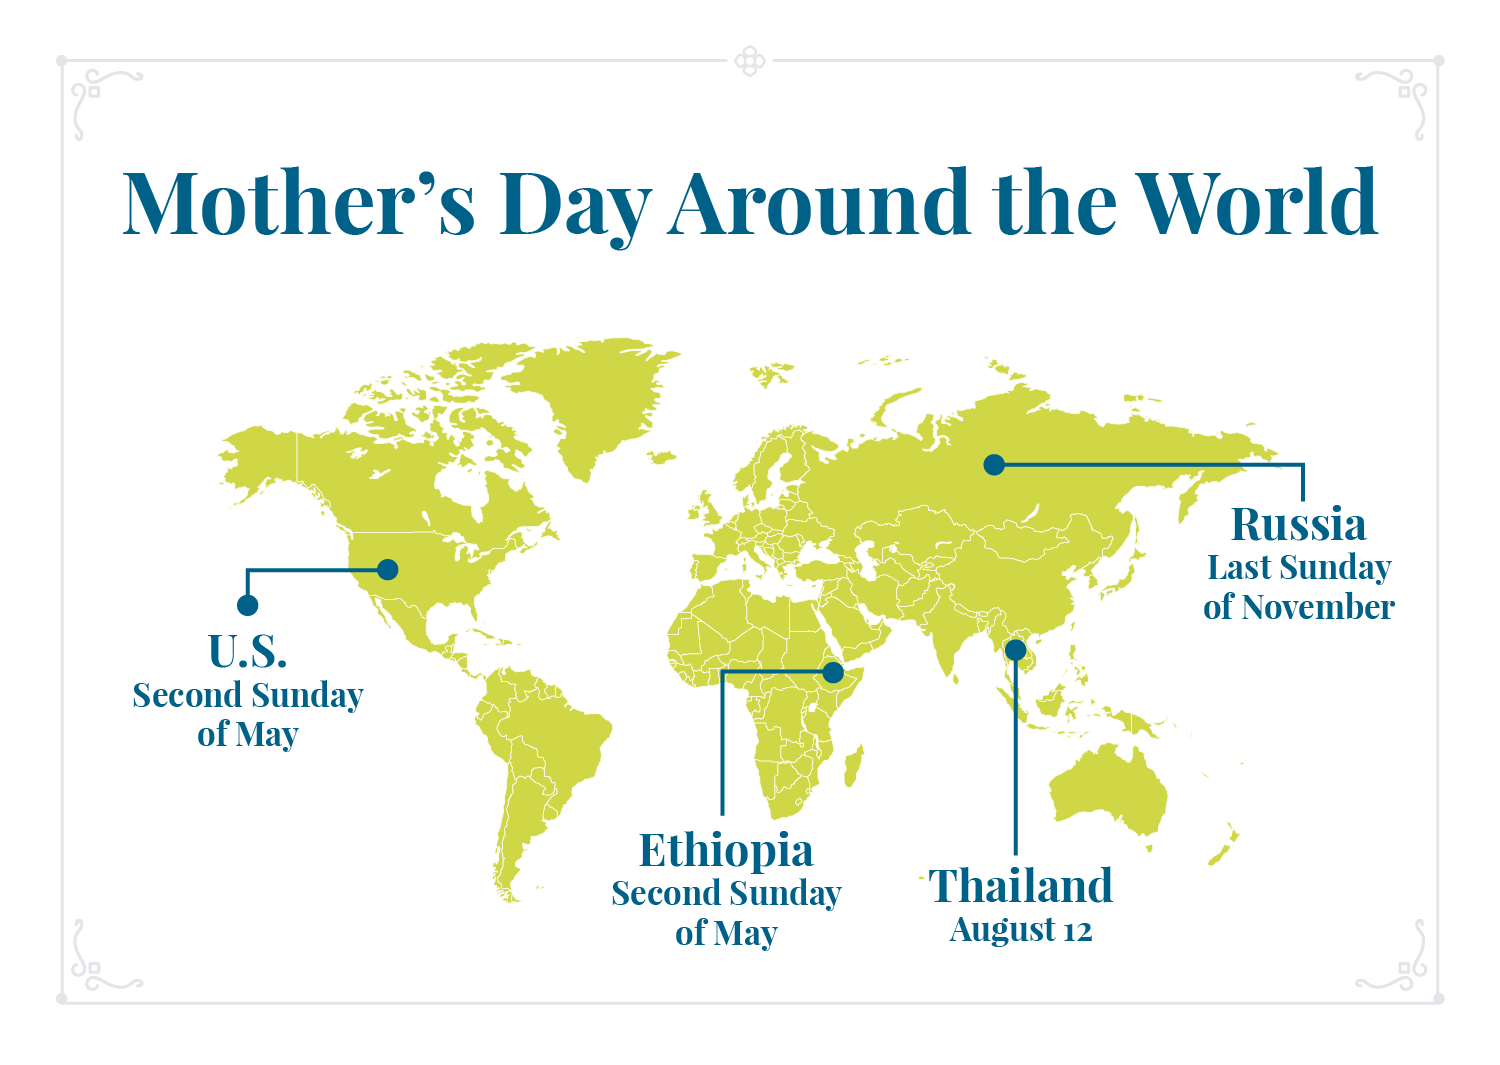 Mother's Day by the numbers: Historical facts, stats and celebrations